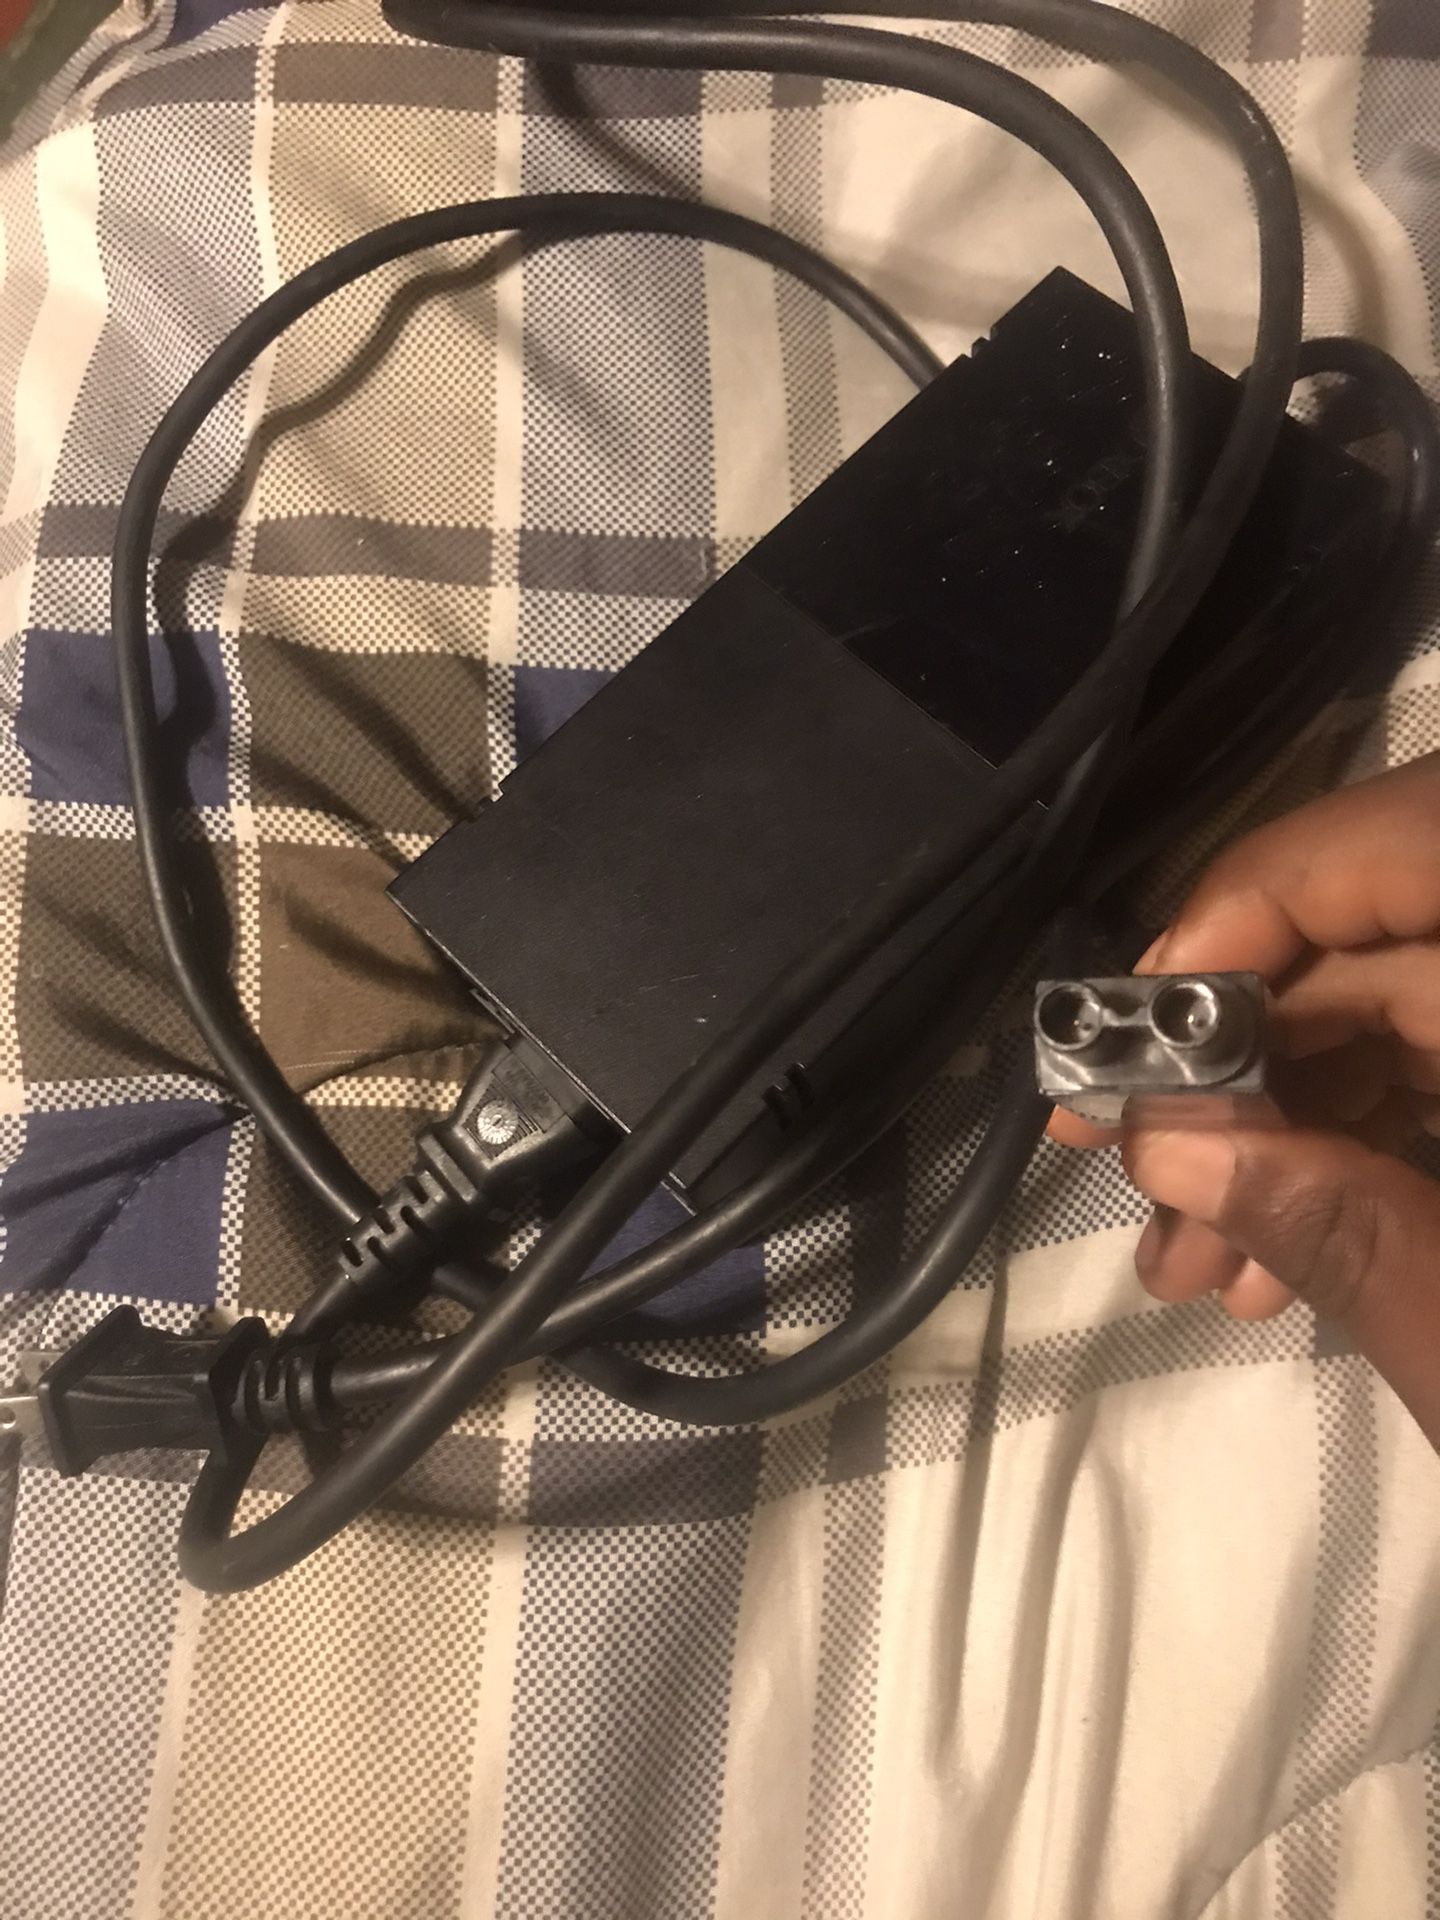 Xbox one power source & cord